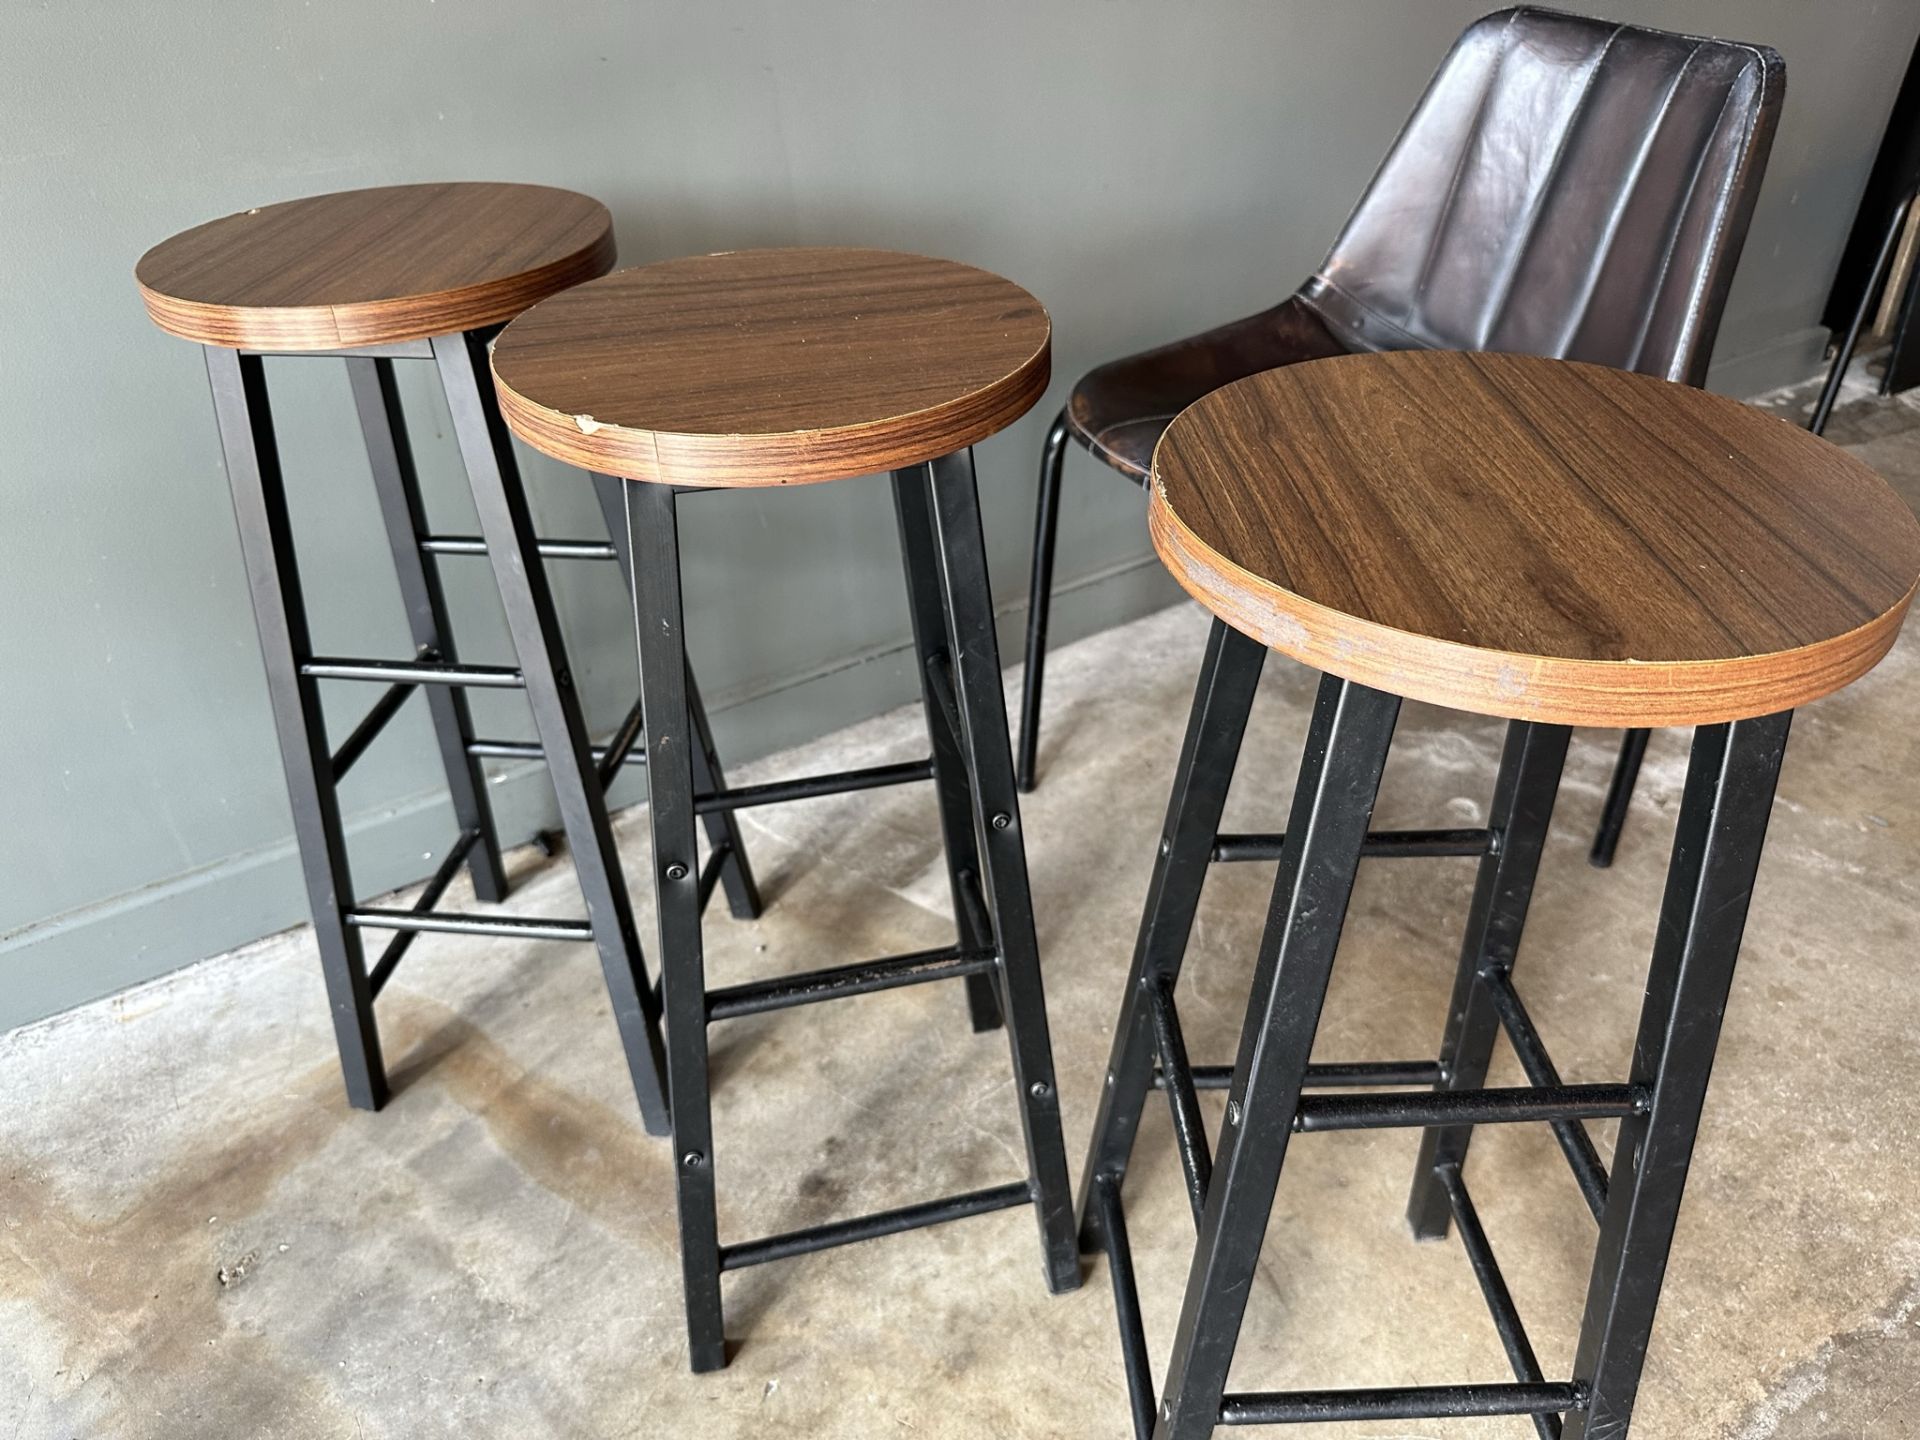 High Wooden Table With Stools With 3 Stools - Image 4 of 4